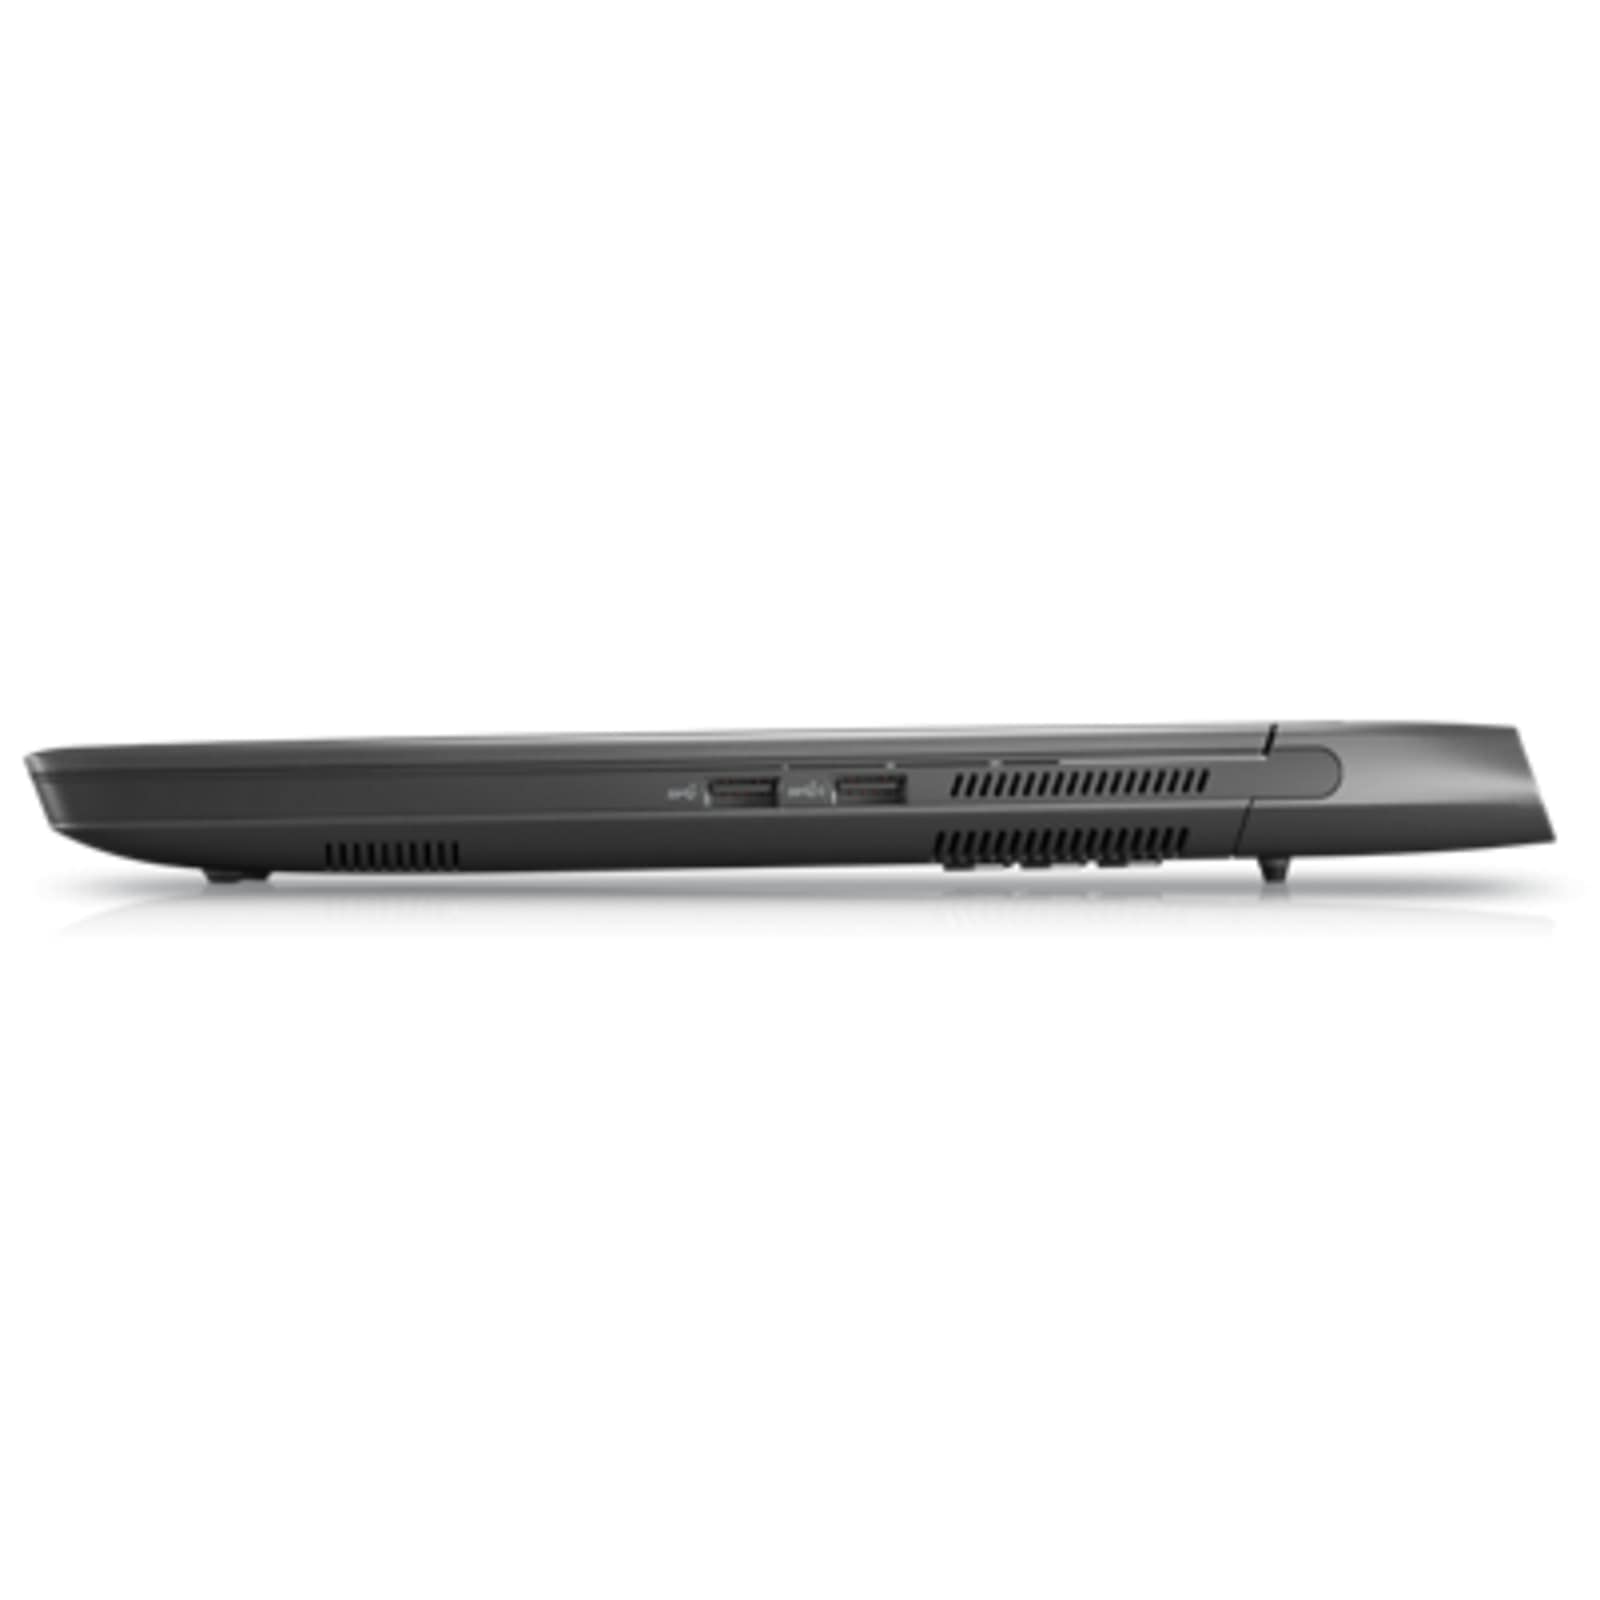 Dell Alienware m15 R7 Gaming Laptop (2022) | 15.6